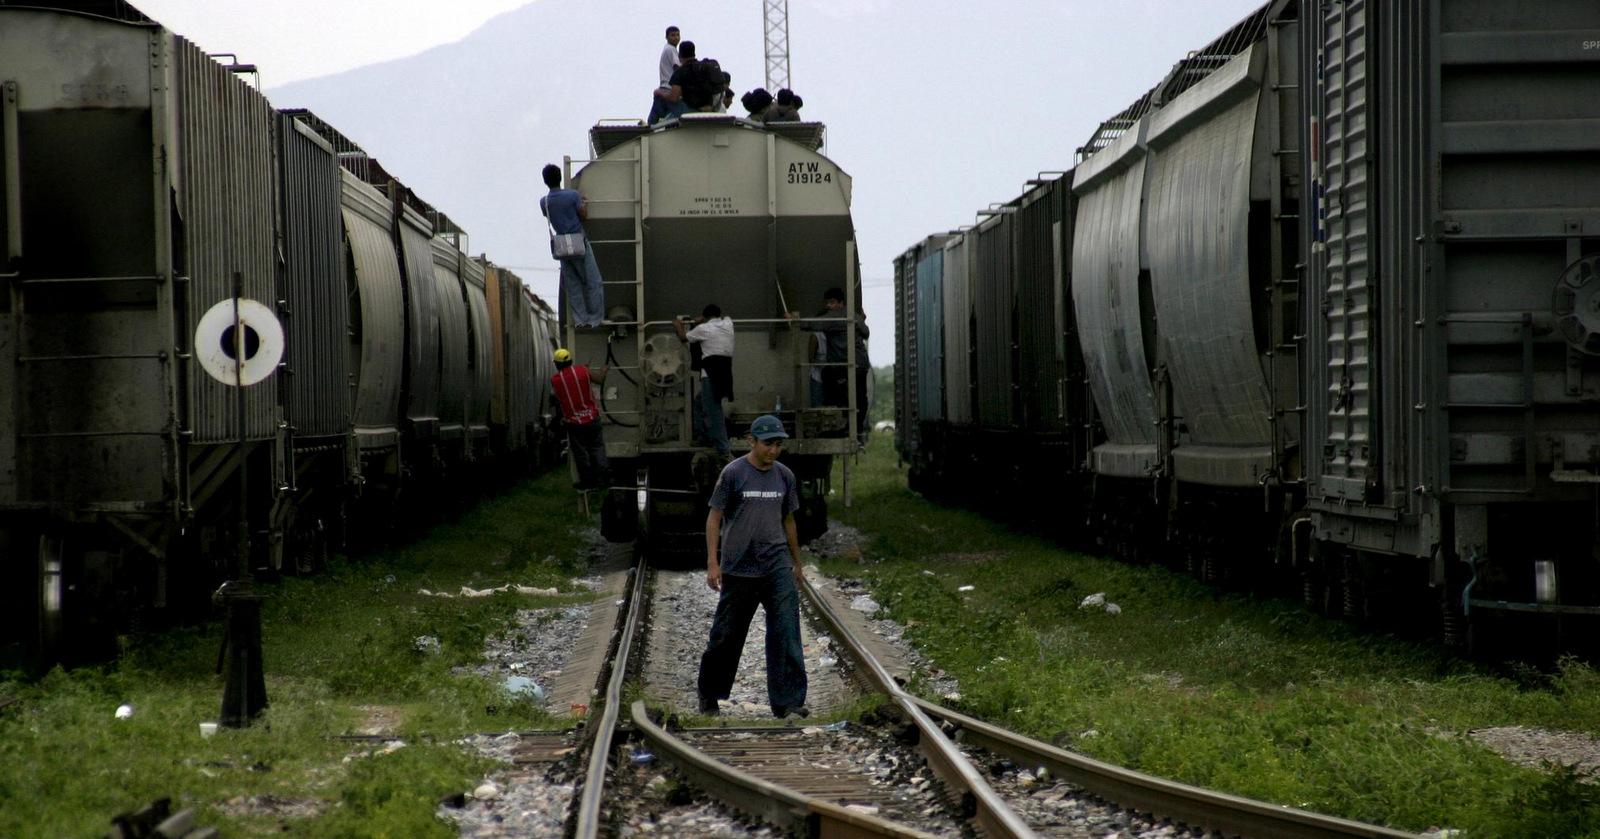 Many Central American immigrants catch freight trains on the way to the U.S.-Mexico border. These trains are commonly known as "La Bestia." A song of the same name refers to the dangerous journey many find aboard such trains.